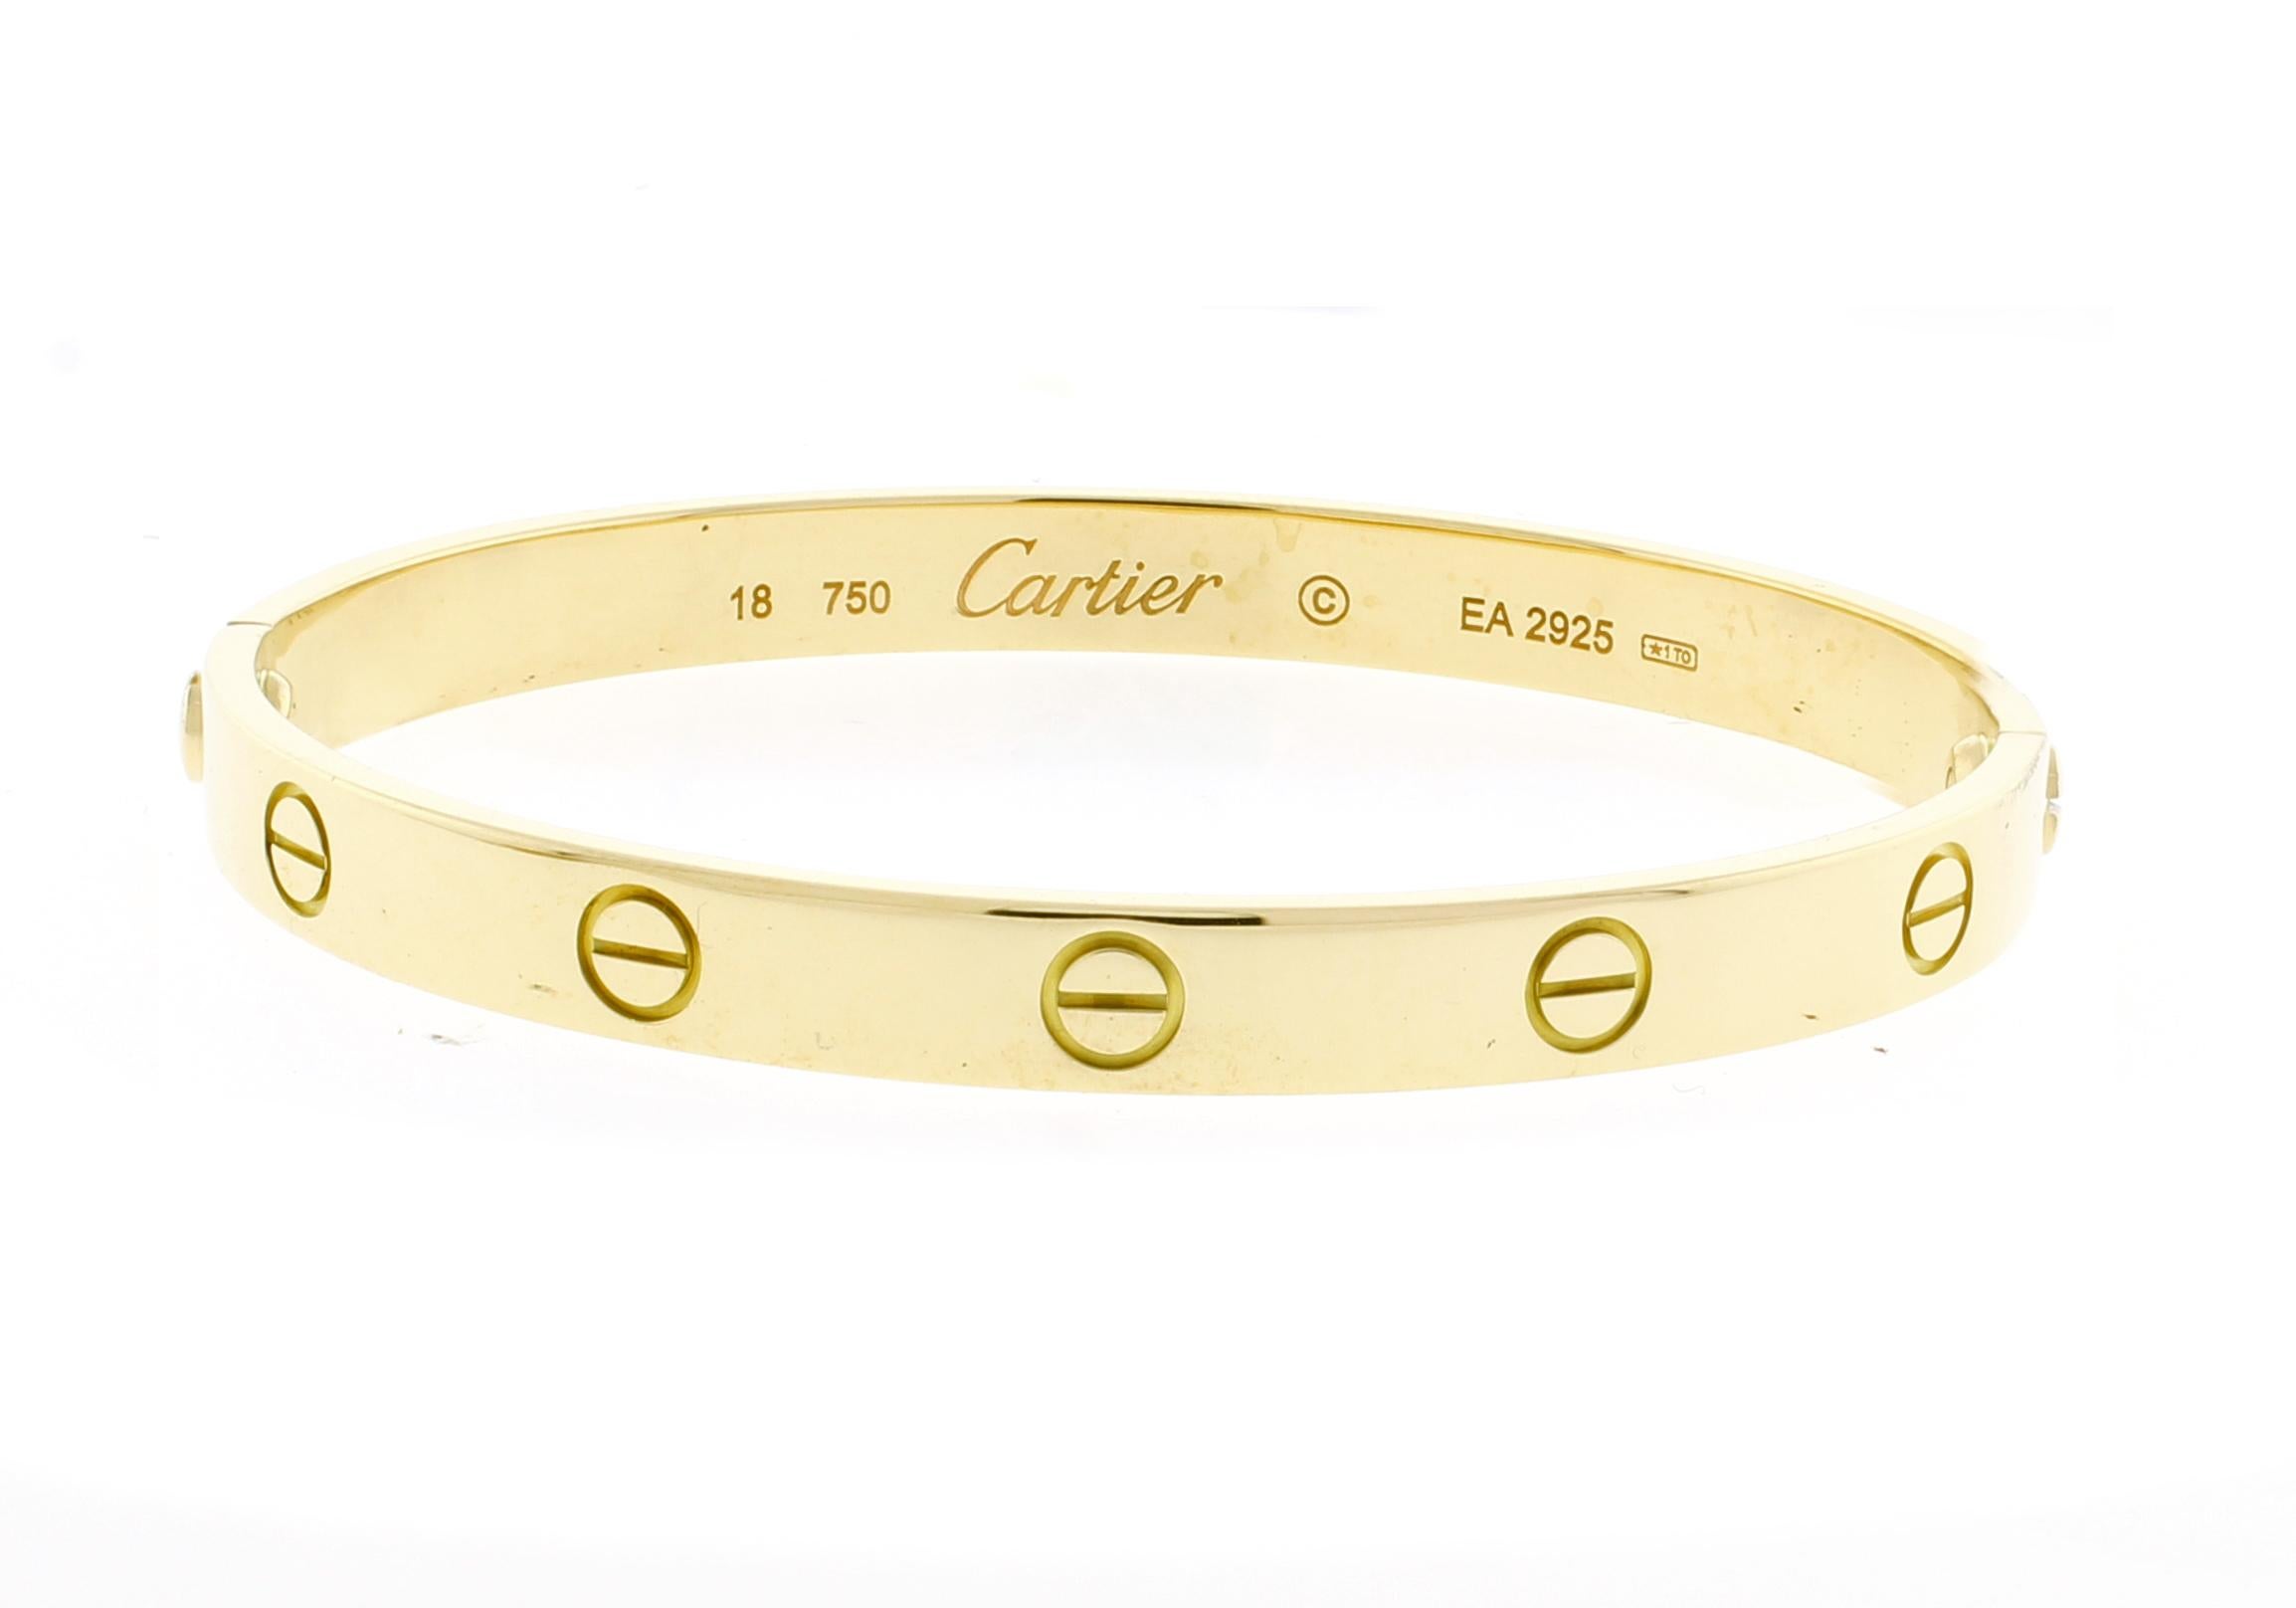 The  Cartier love bracelet remains an iconic symbol of love that transcends convention.
♦ Designer / Hallmarks: Cartier
♦ Original strew system
♦ Metal: 18 karat
♦ Circa January 2010
♦ Size 18
♦ Packaging: Cartier Boxes, screw driver  
♦ Condition: